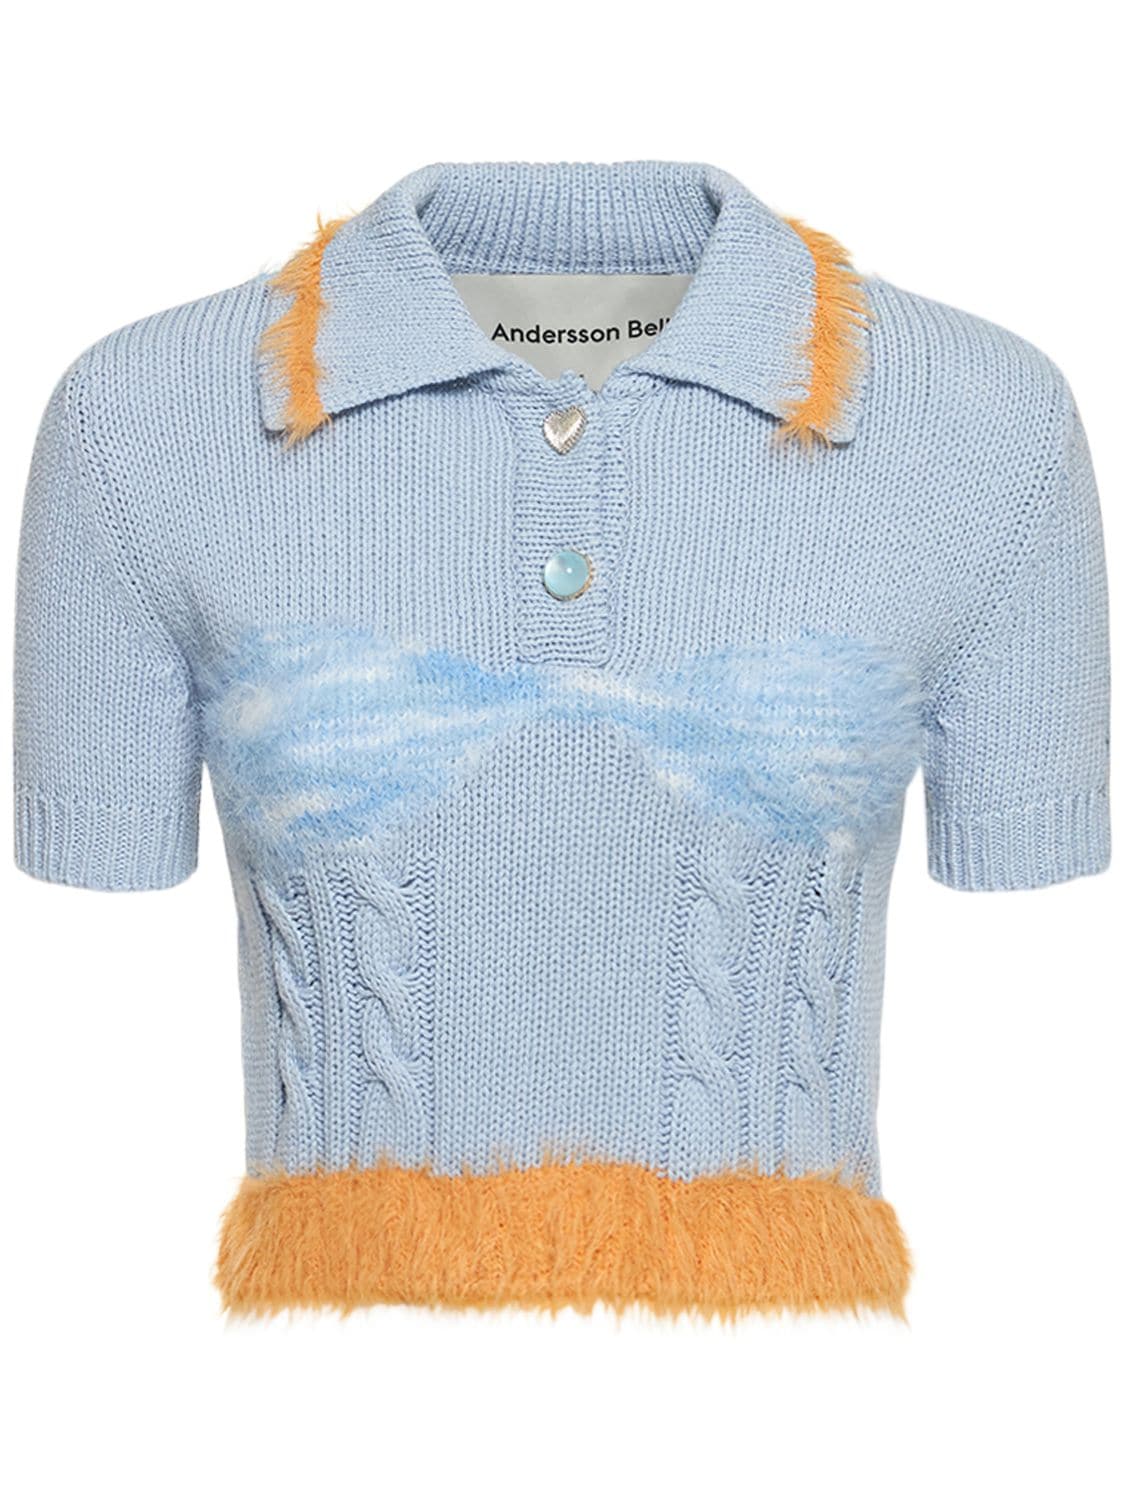 ANDERSSON BELL HAYES underwear INTARSIA KNIT TOP